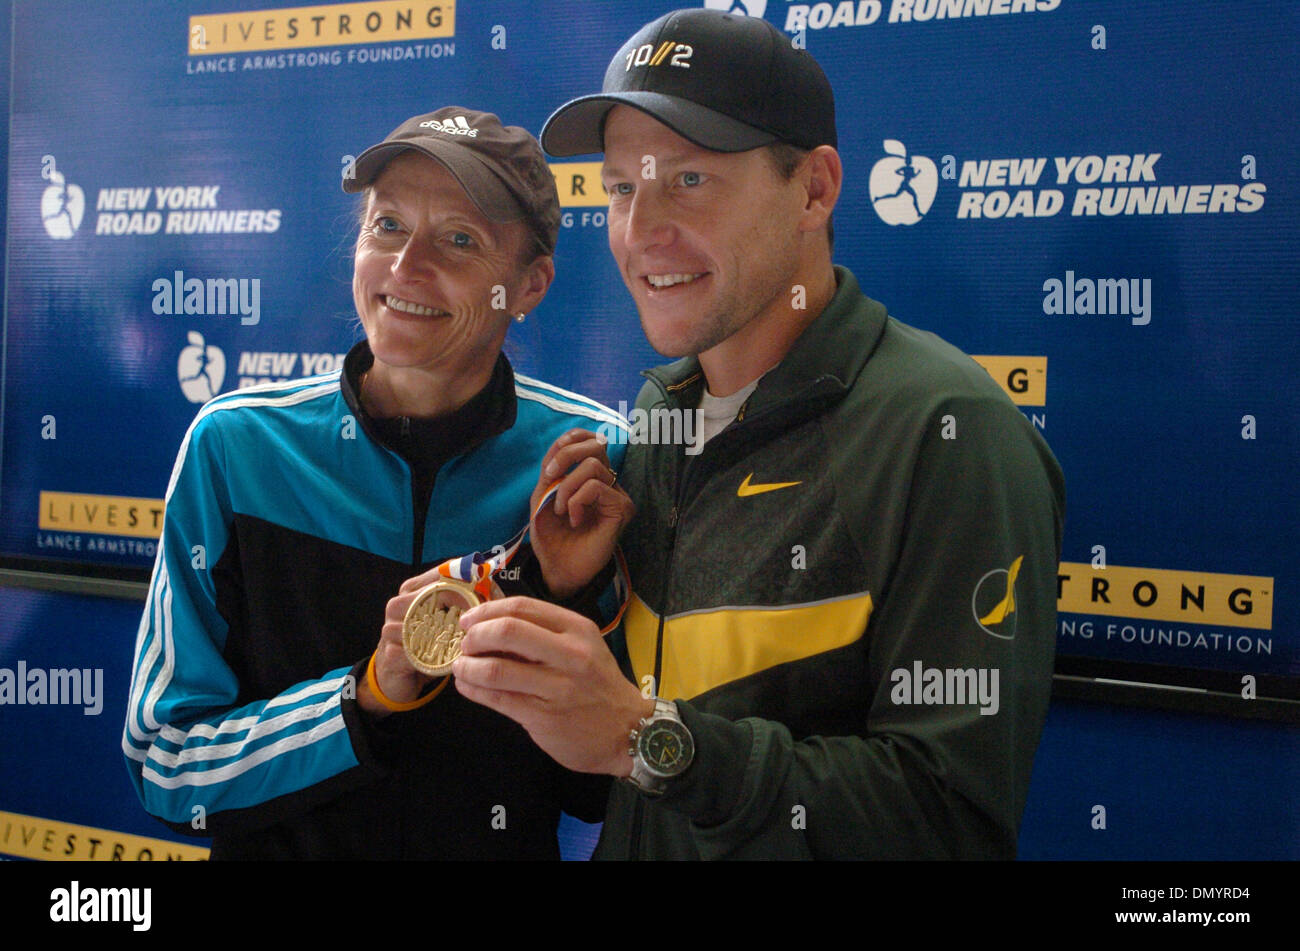 Nov 03, 2006; MANHATTAN, NY, USA; GRETE WAITZ (L), nine time New York City Marathon winner and LANCE ARMSTRONG, seven time Tour de France winner, hosts a press conference to discuss his participation in the 2006 New York City Marathon. Armstrong says he plans to run the marathon in under three hours and will be surrounded by former marathon champions Alberto Salazar and Joan Benoit Stock Photo